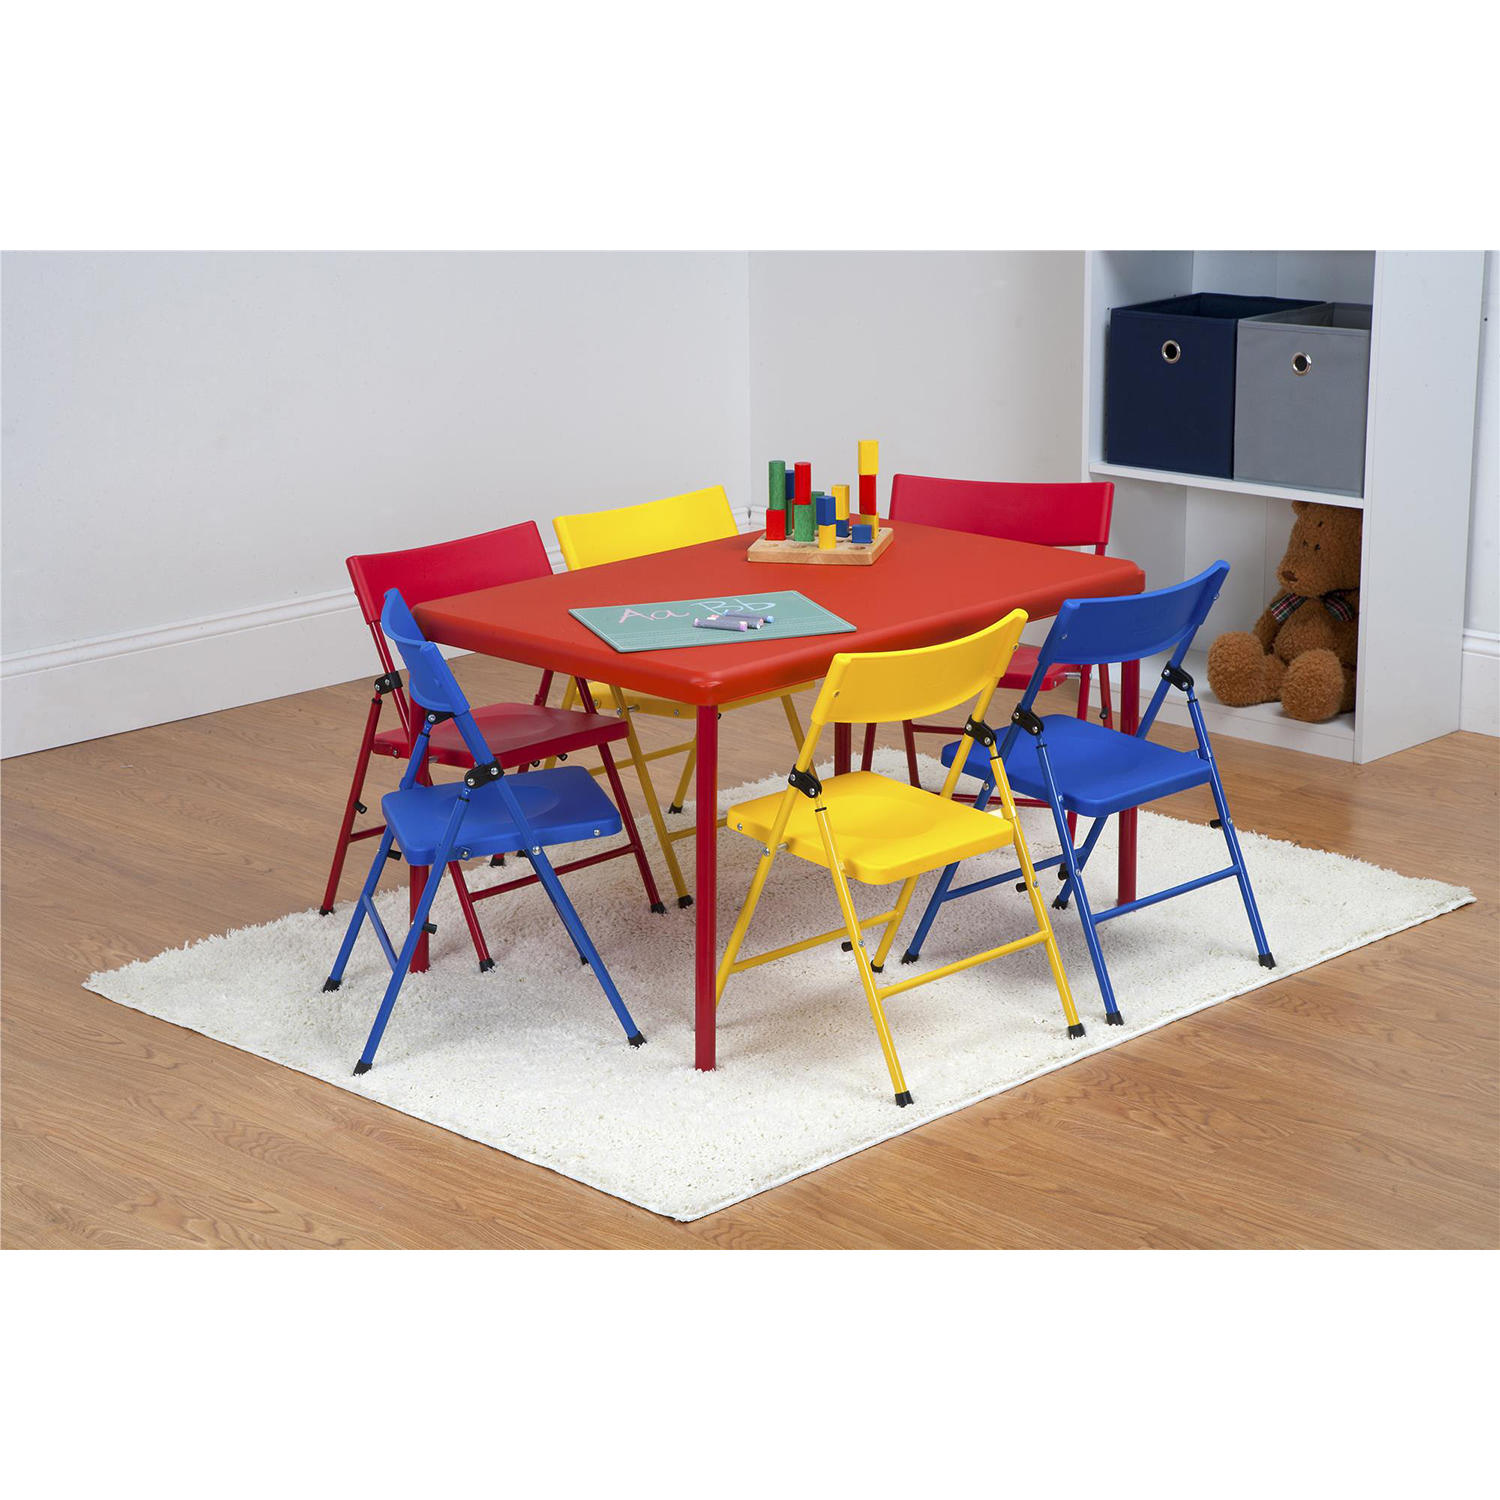 Safety First 7-Piece Children’s Juvenile Set with Pinch-Free Folding Chairs